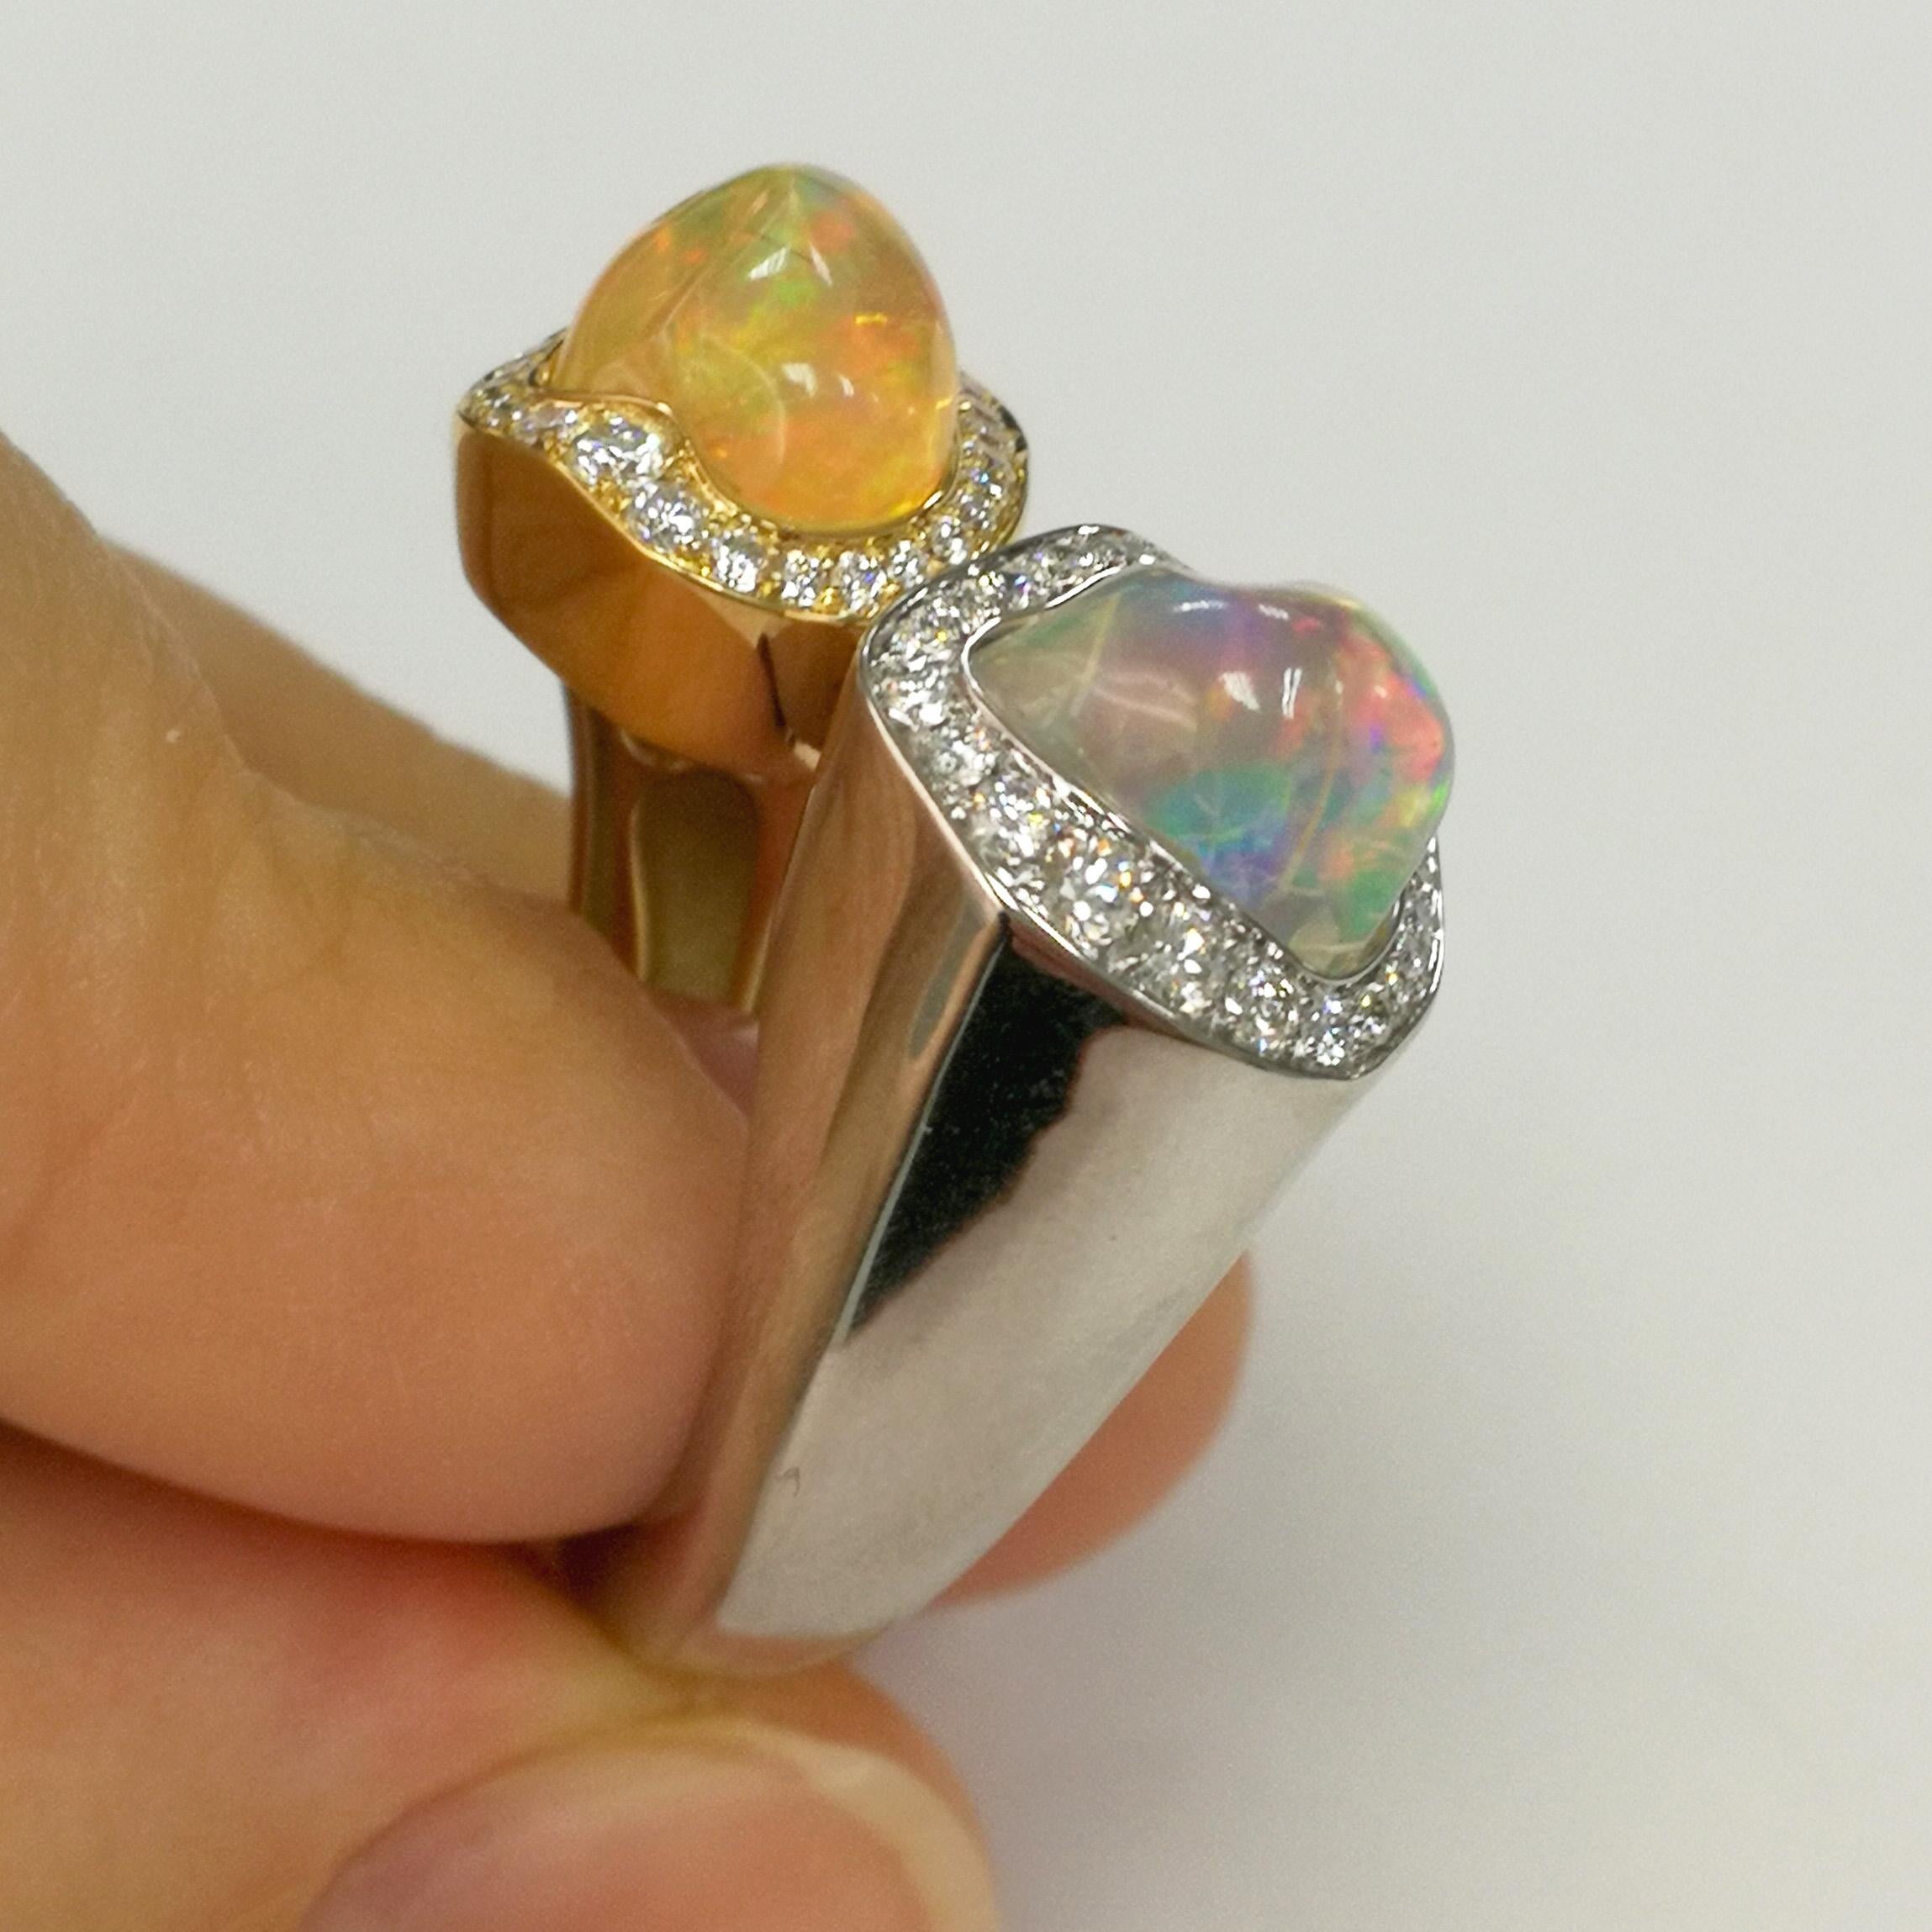 Sugarloaf Cabochon Mexican Opal 5.84 Carat Diamonds One of a Kind 18 Karat Yellow White Gold Ring